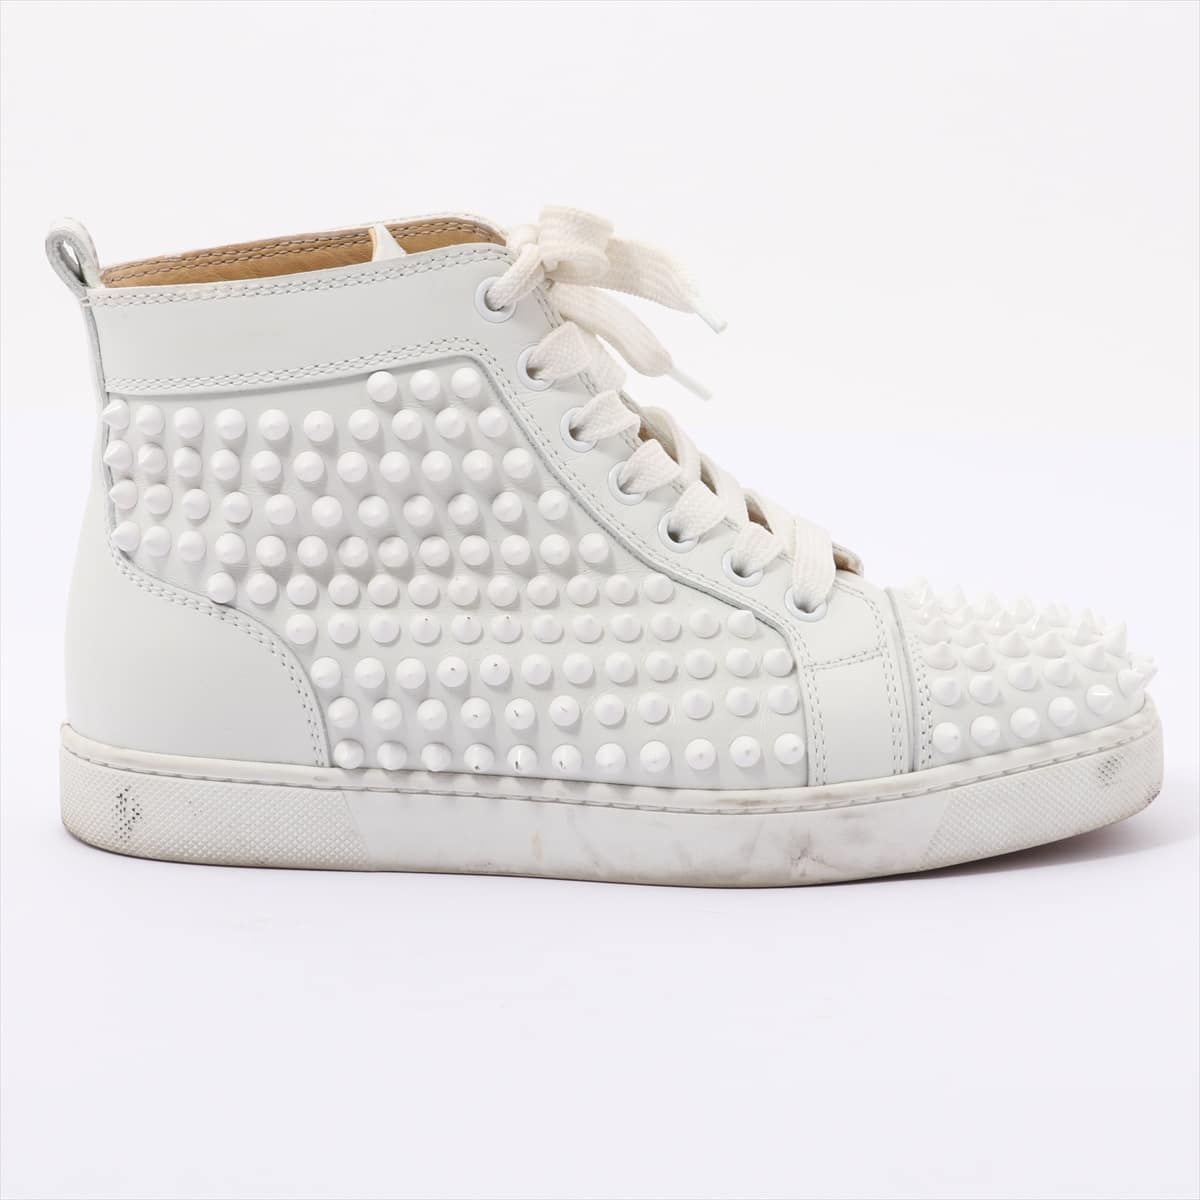 Christian Louboutin Lewis Spike Leather High-top Sneakers 35 Ladies' White